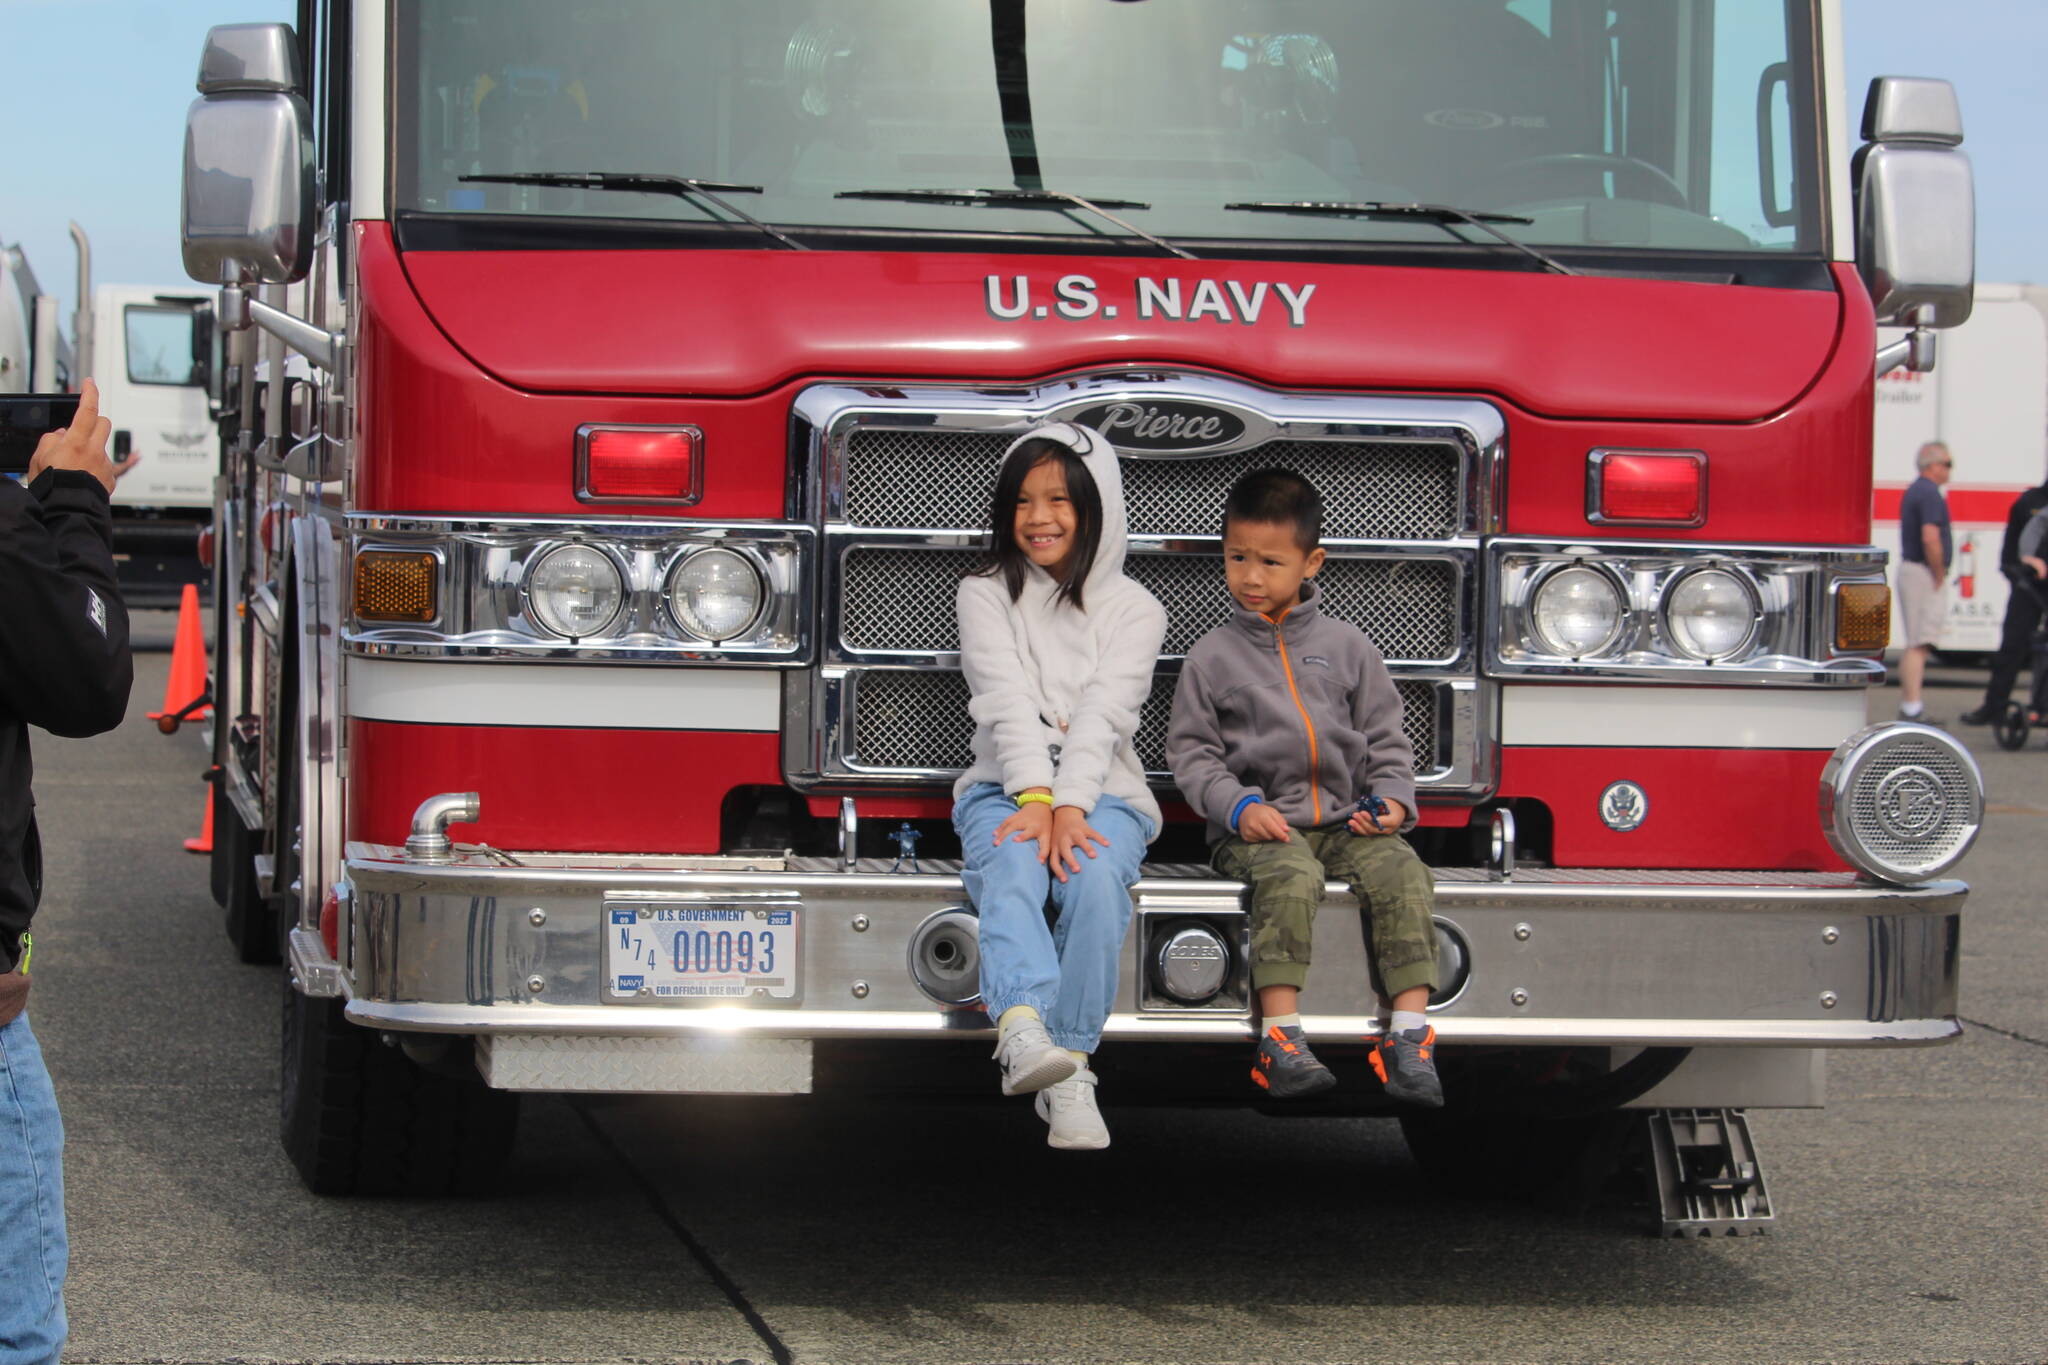 Photo by Karina Andrew/Whidbey News-Times
Kids pose for a photo on a Navy fire truck.